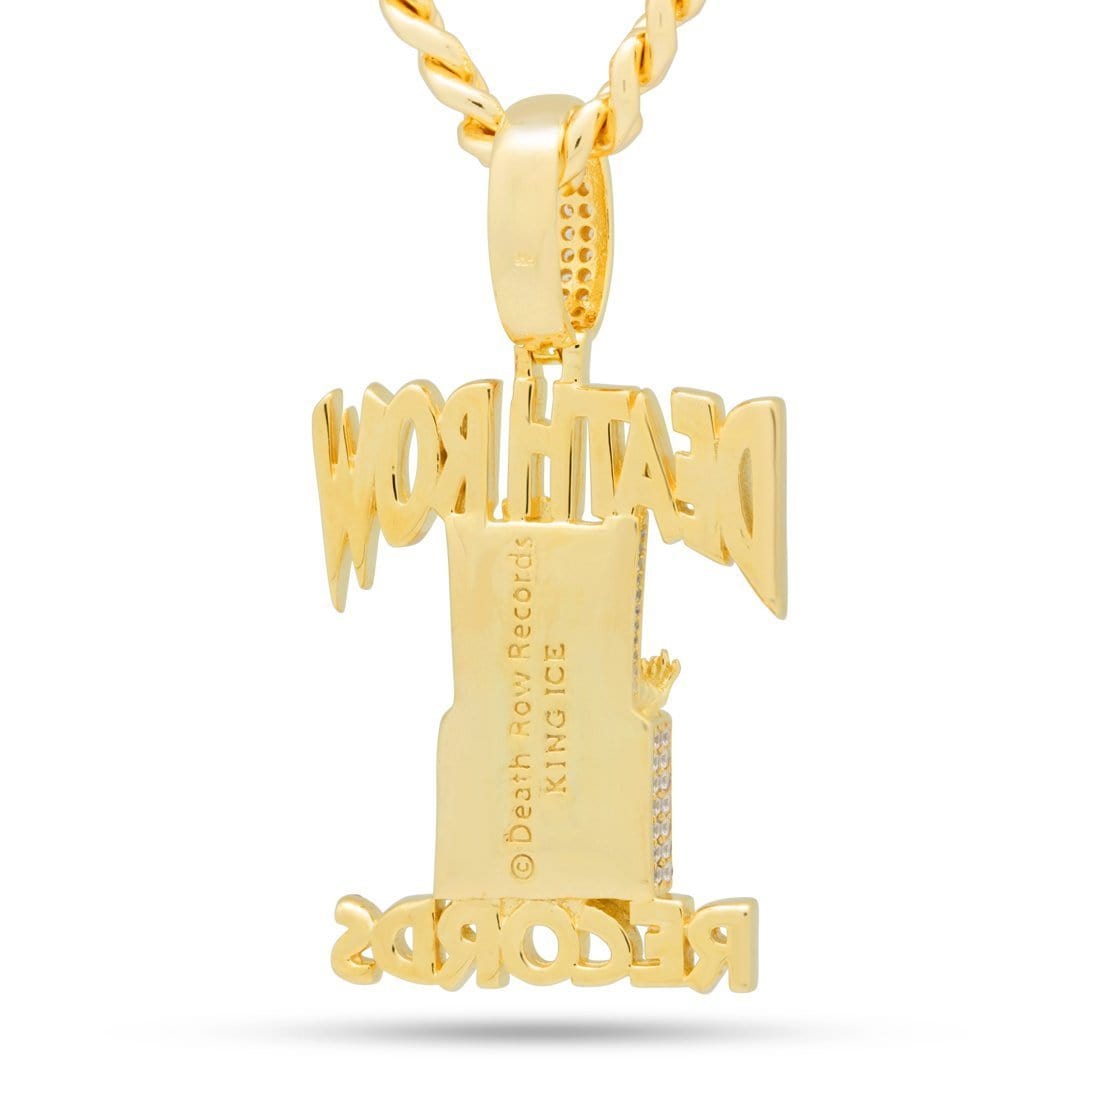 NLE Choppa x King Ice - Red No Love Necklace – merlettenyc563.com